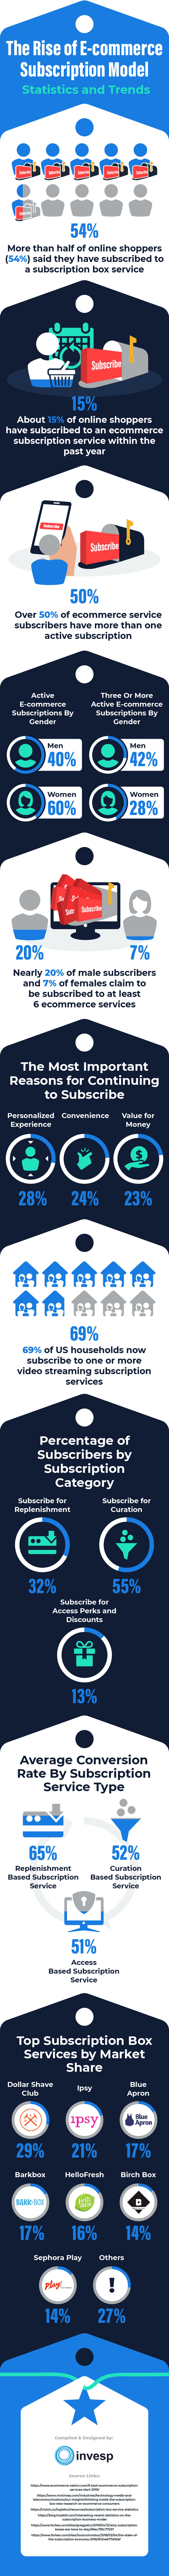 The Rise of E-commerce Subscription Model – Statistics and Trends